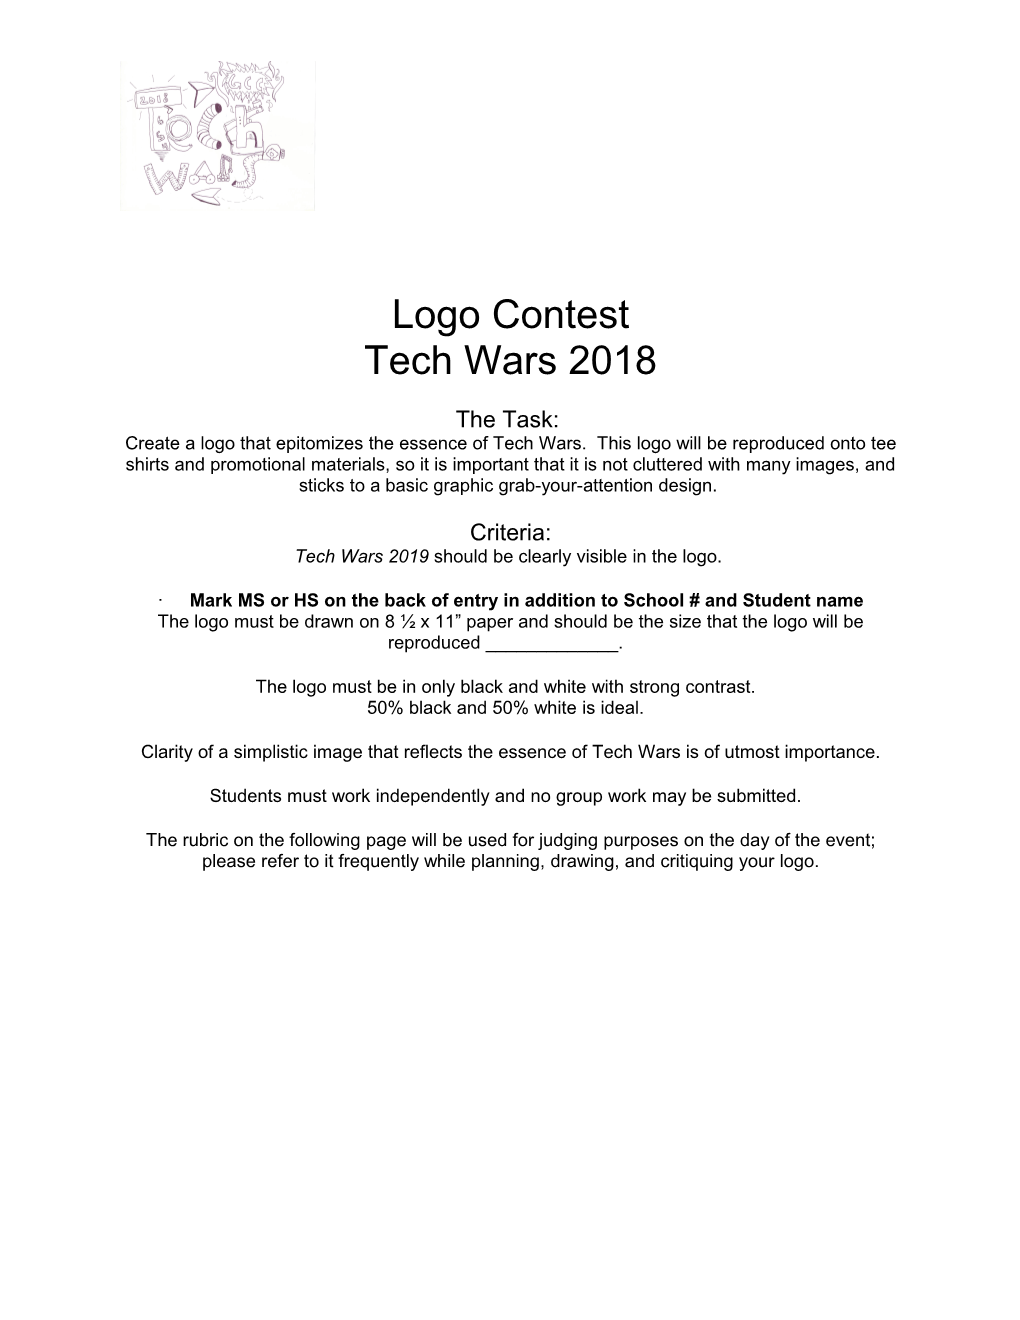 Tech Wars 2019 Should Be Clearly Visible in the Logo